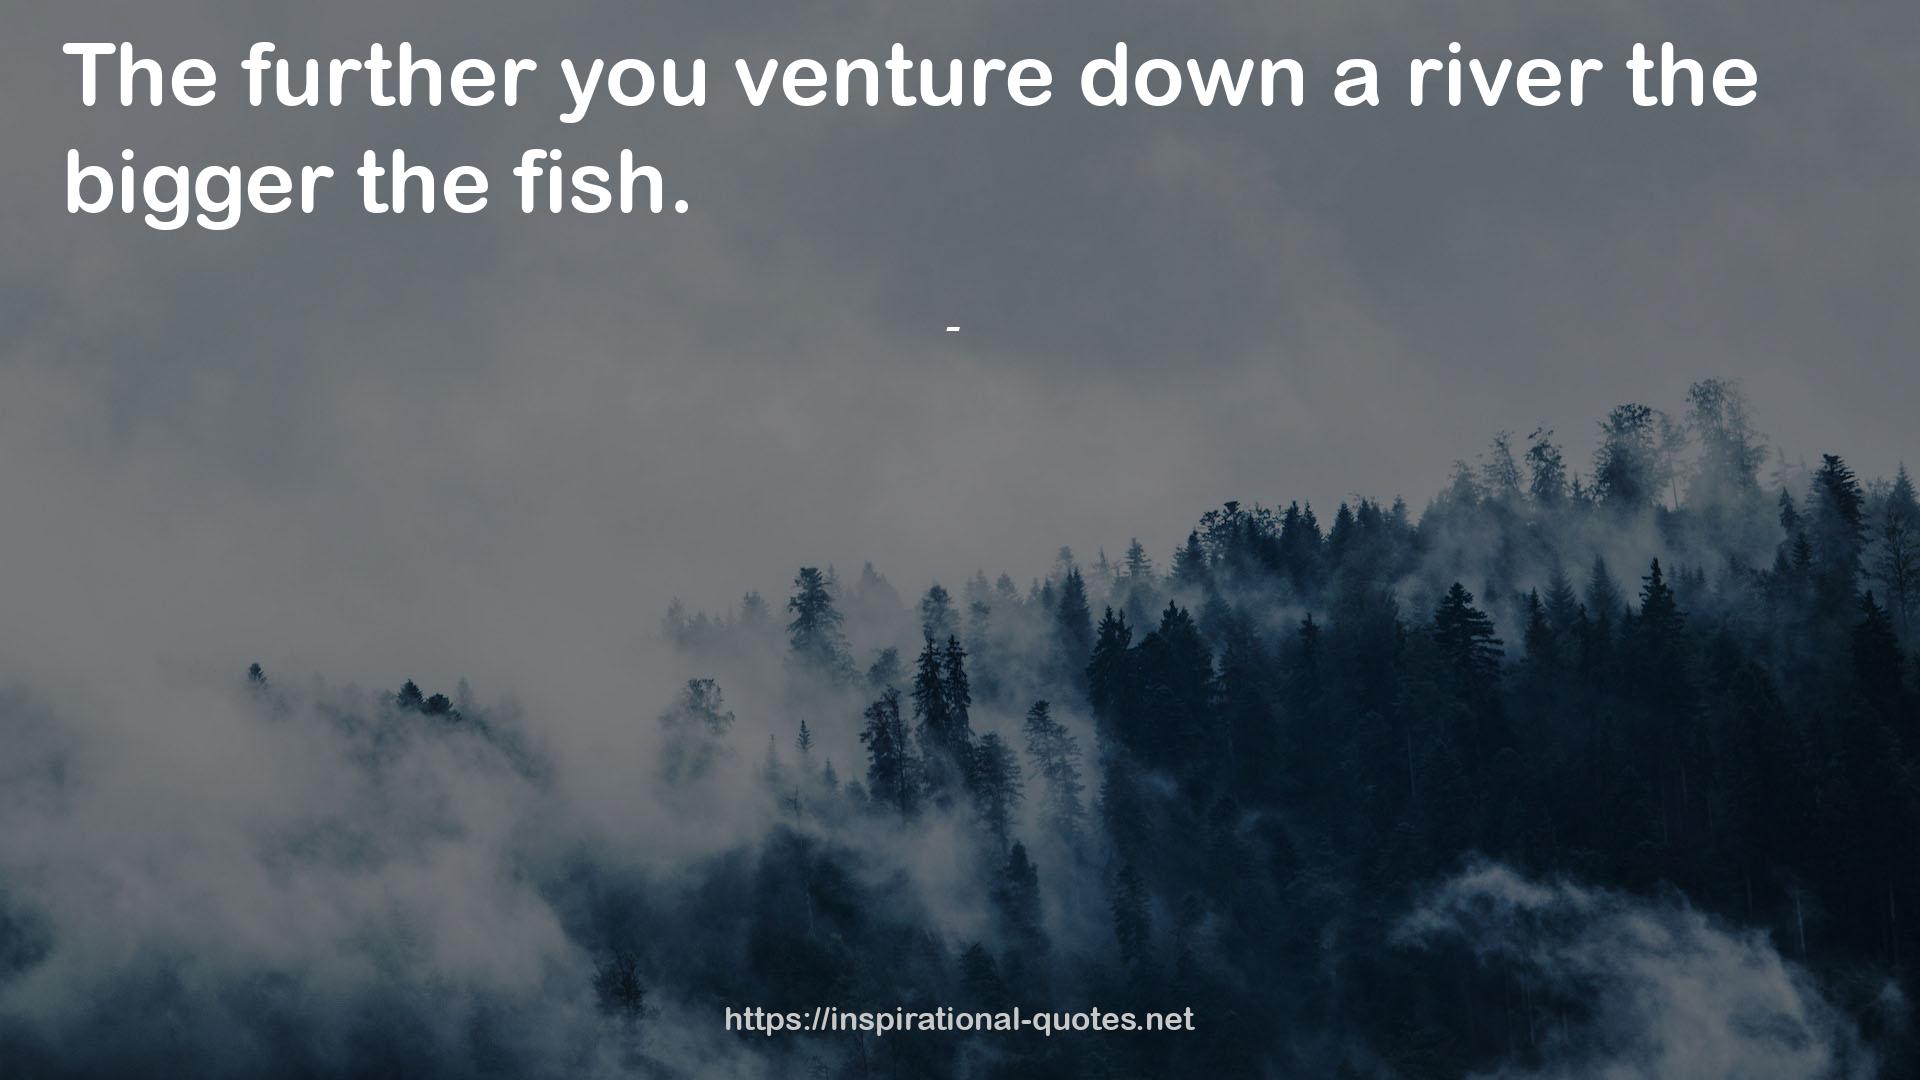  quote : The further you venture down a river the bigger the fish.